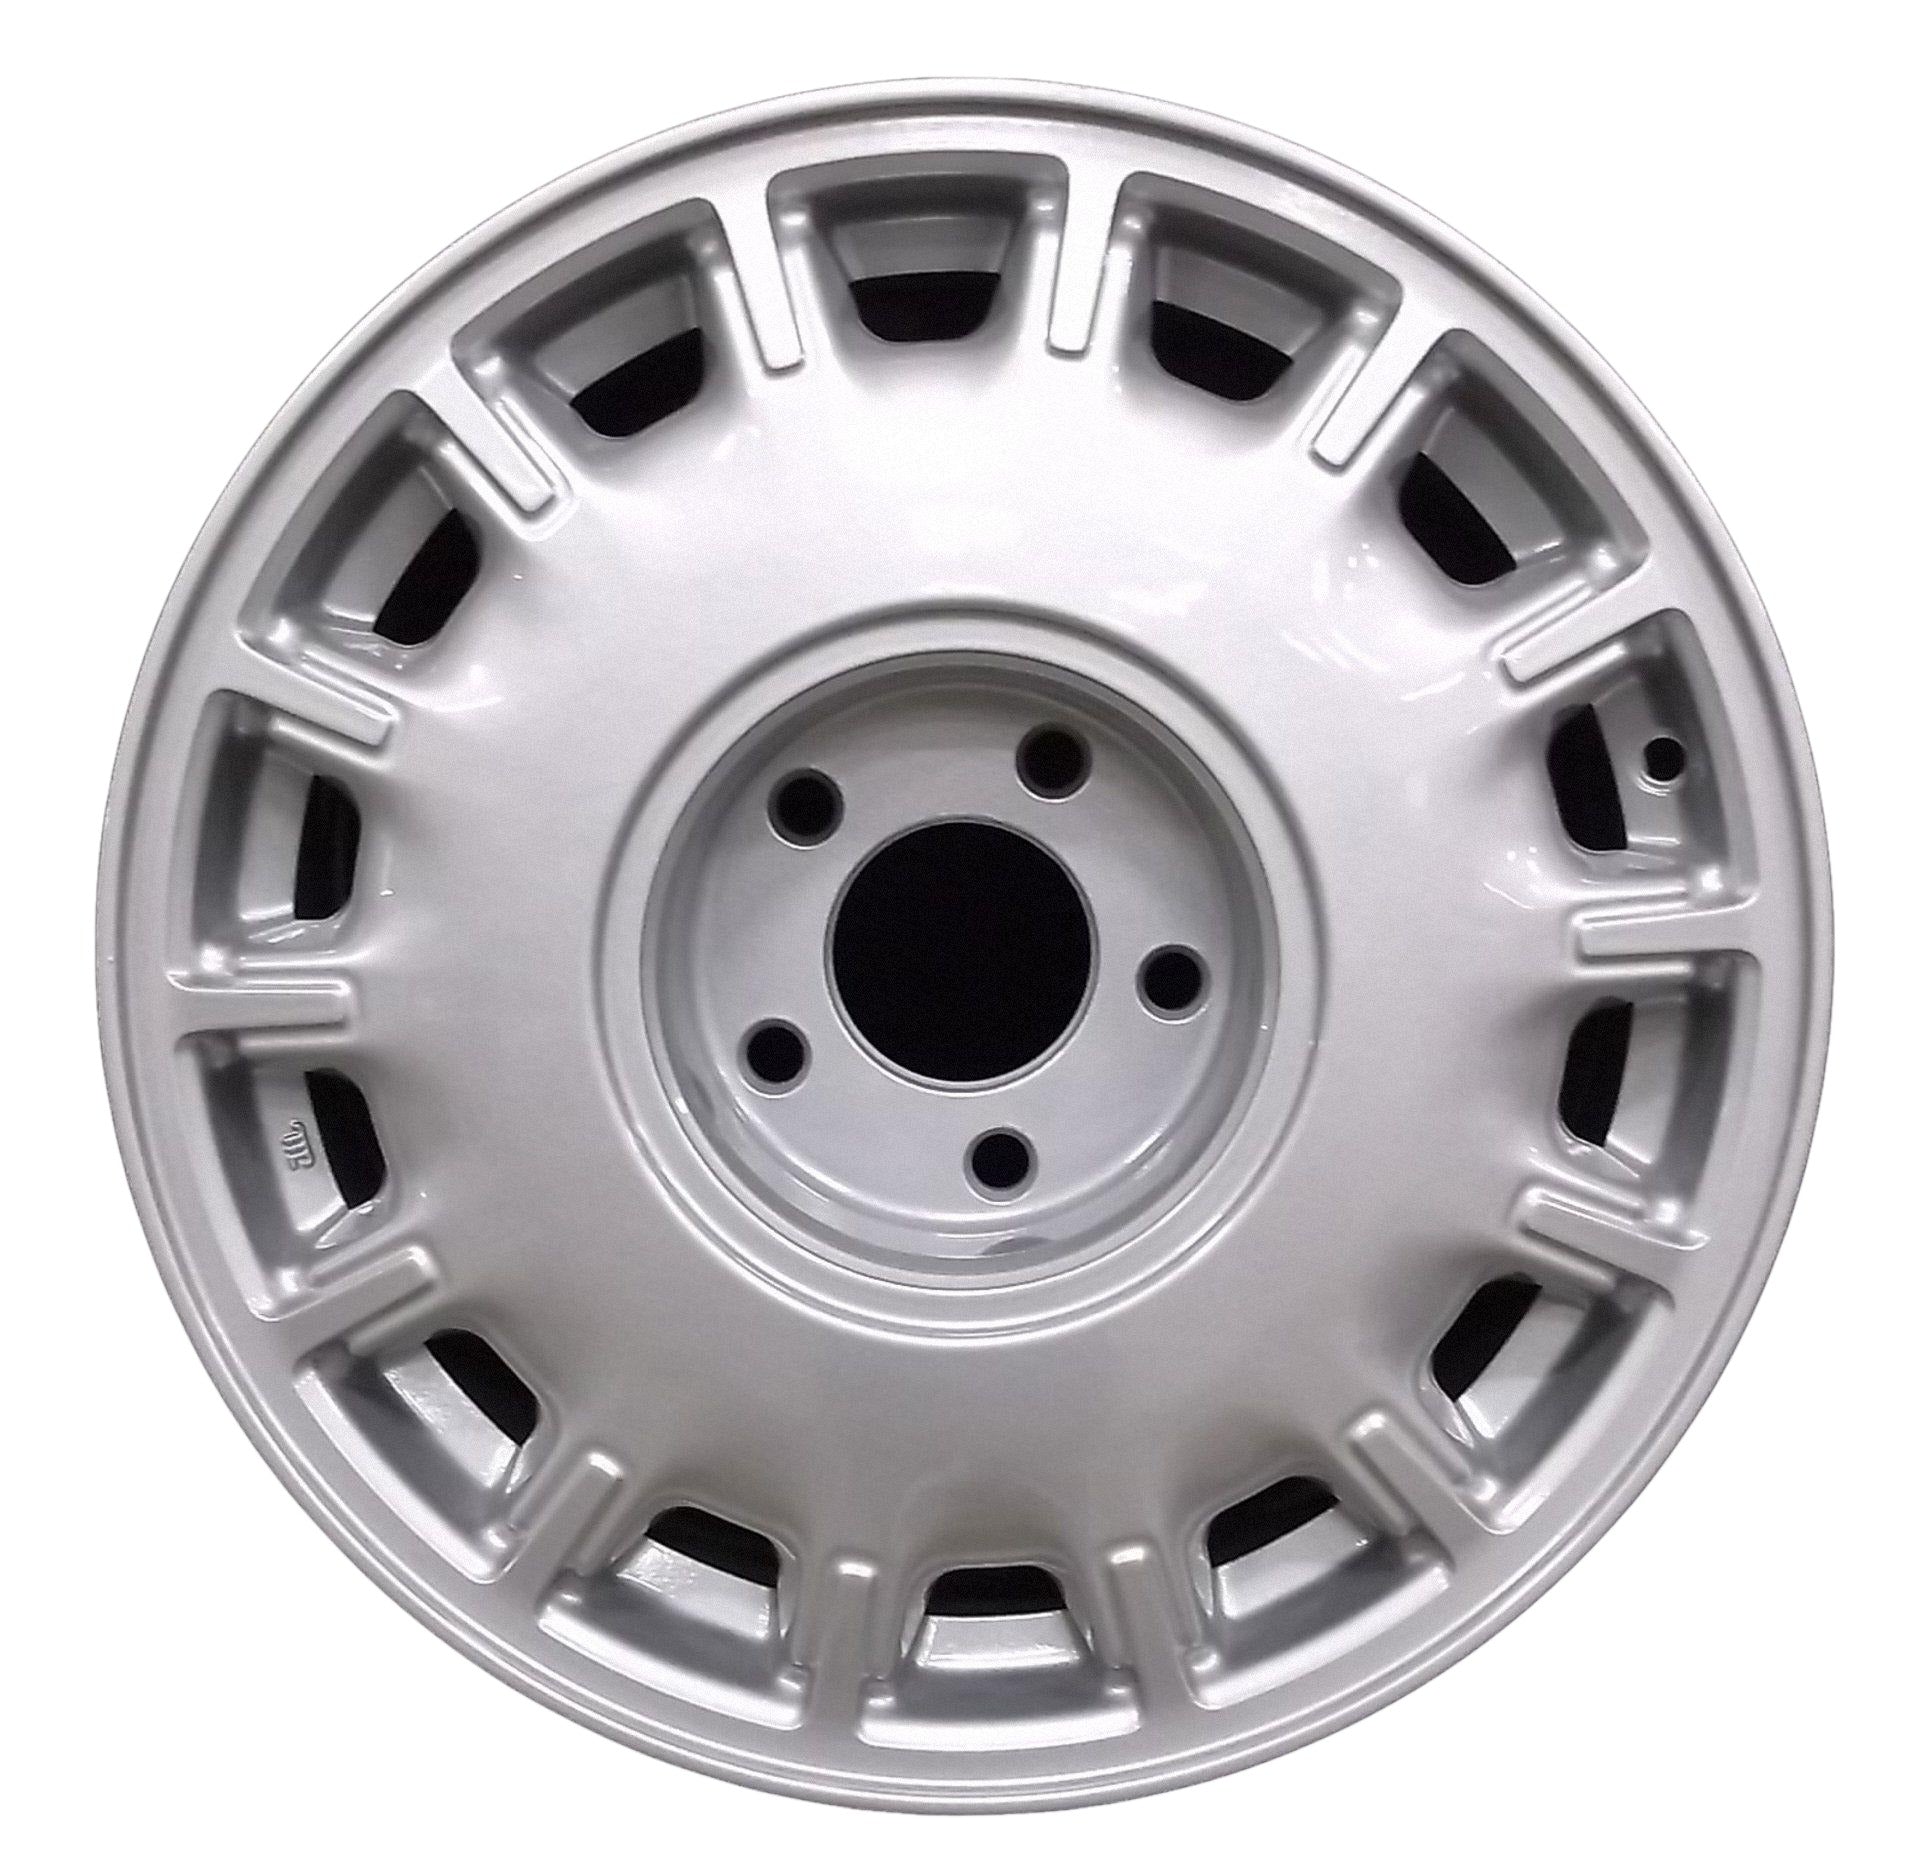 Cadillac Seville  1992, 1993, 1994 Factory OEM Car Wheel Size 16x7 Alloy WAO.4506.PS09.FF